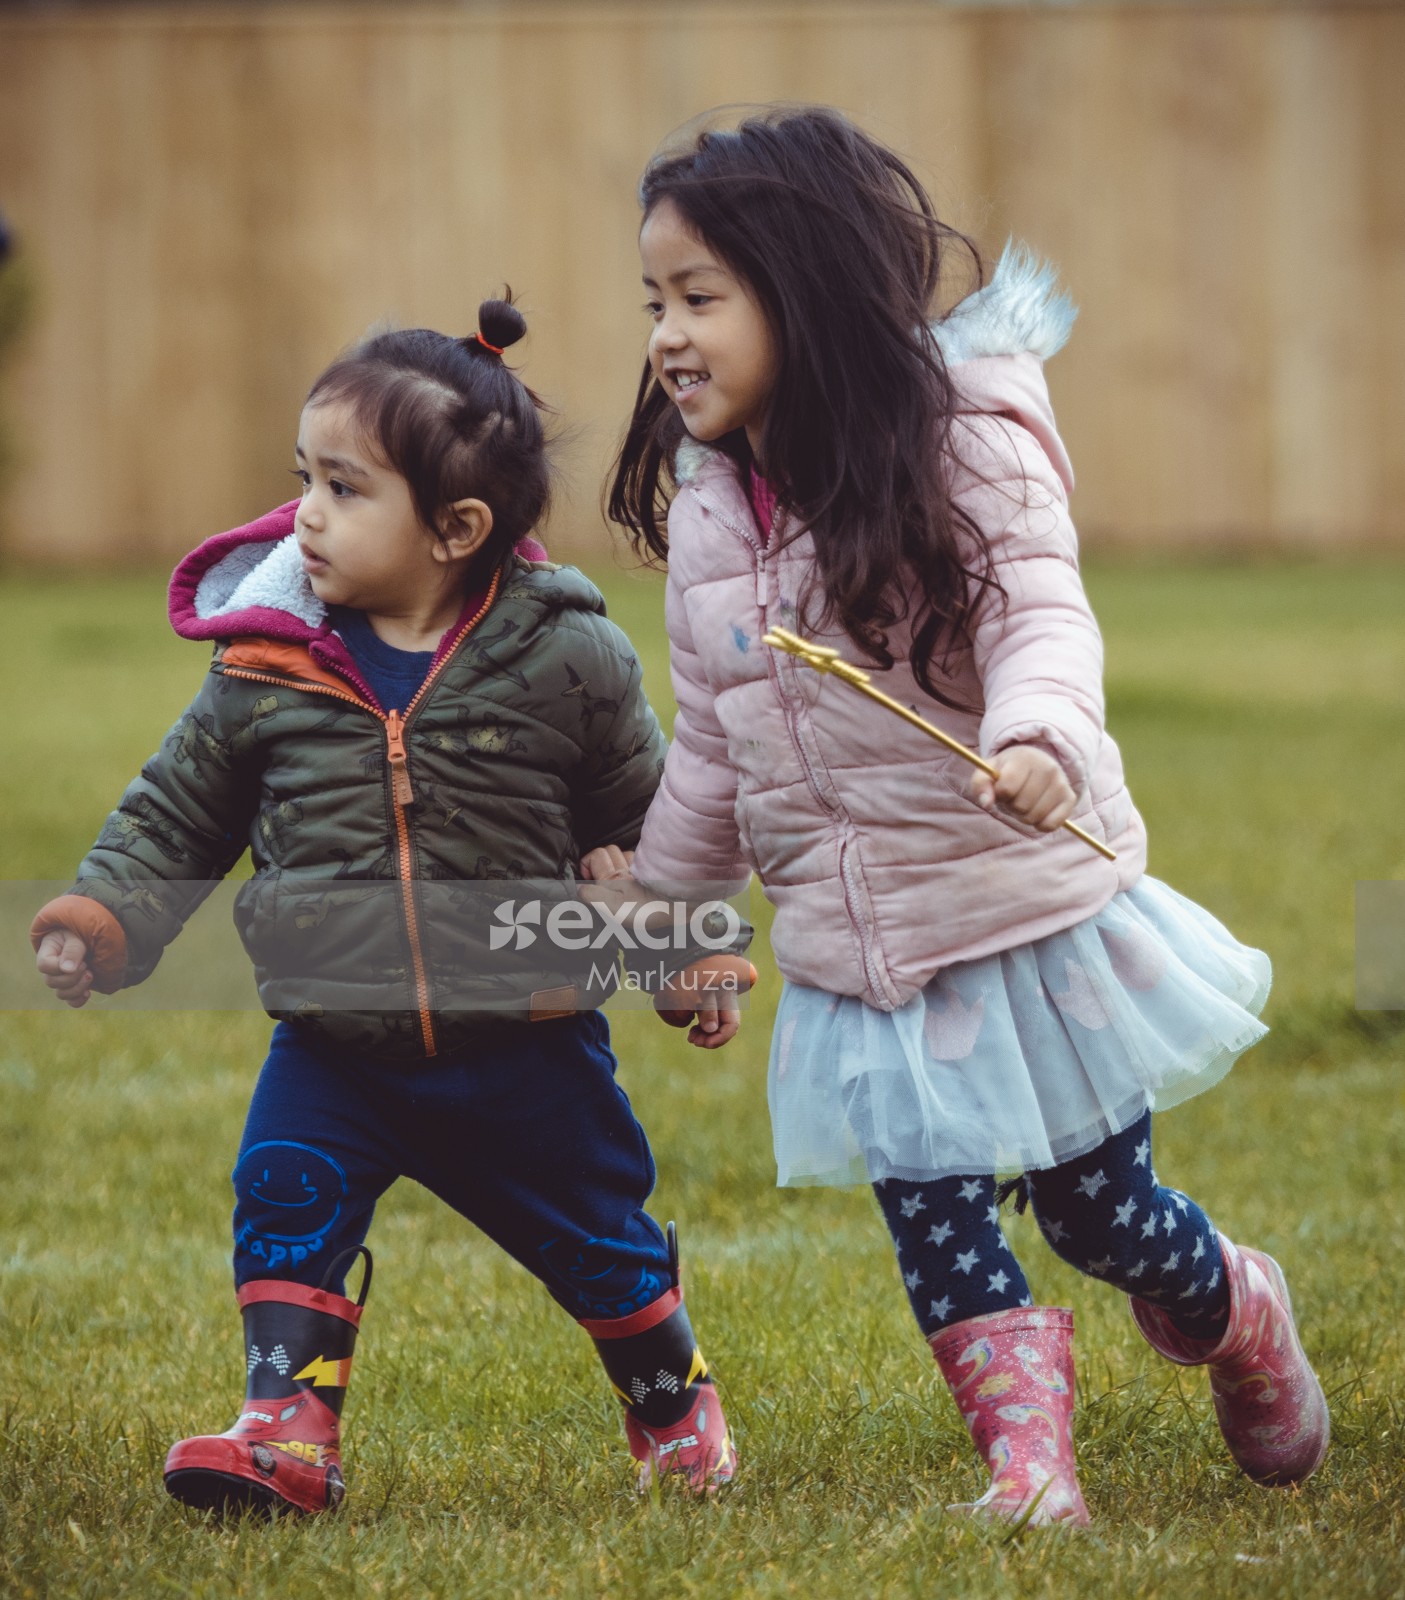 Two girls running with a star wand - Little Dribblers